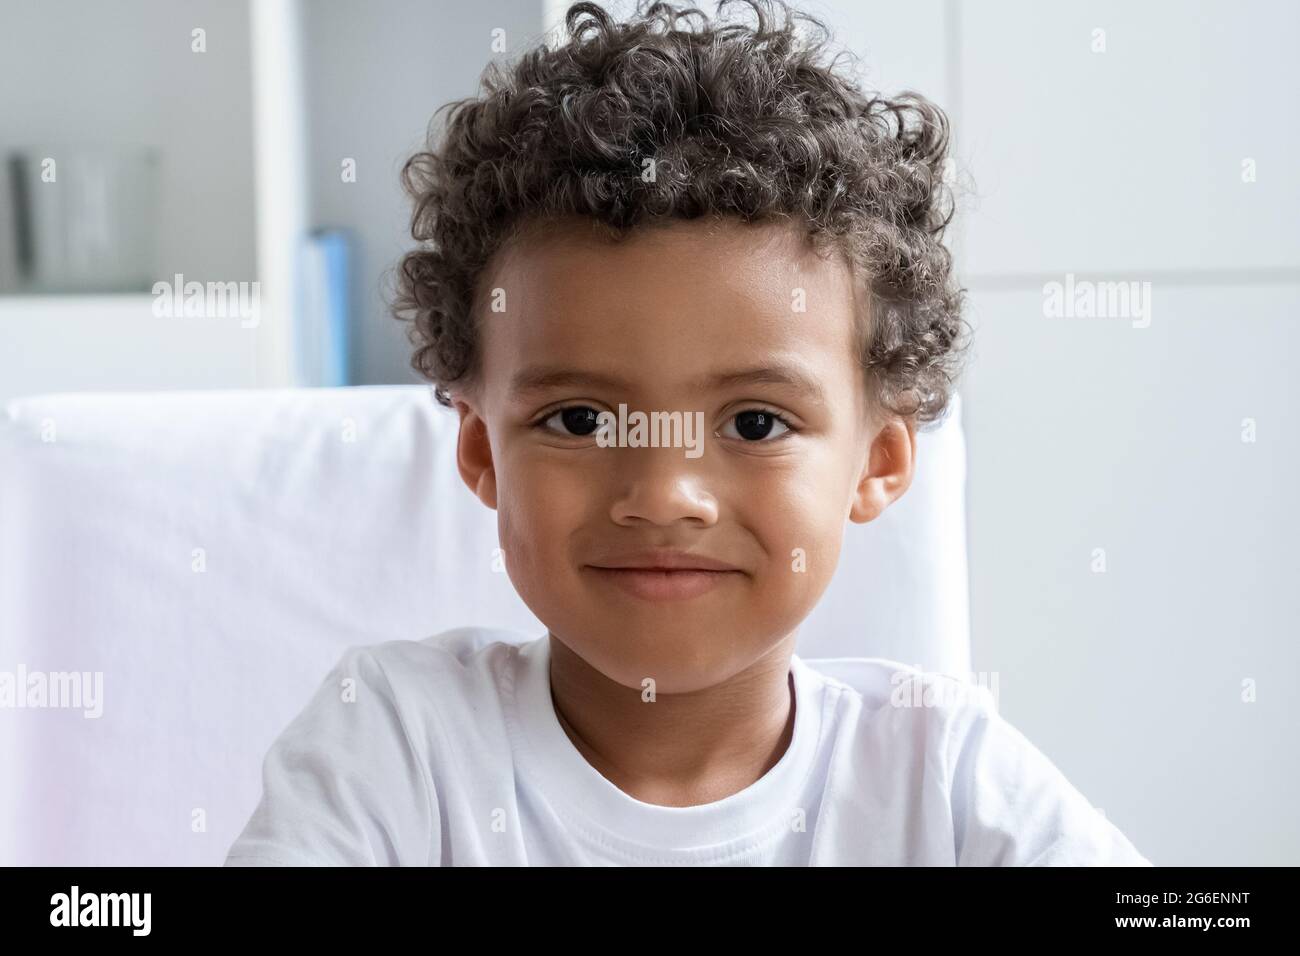 Cute smiling african american boy child looking at camera closeup portrait Stock Photo